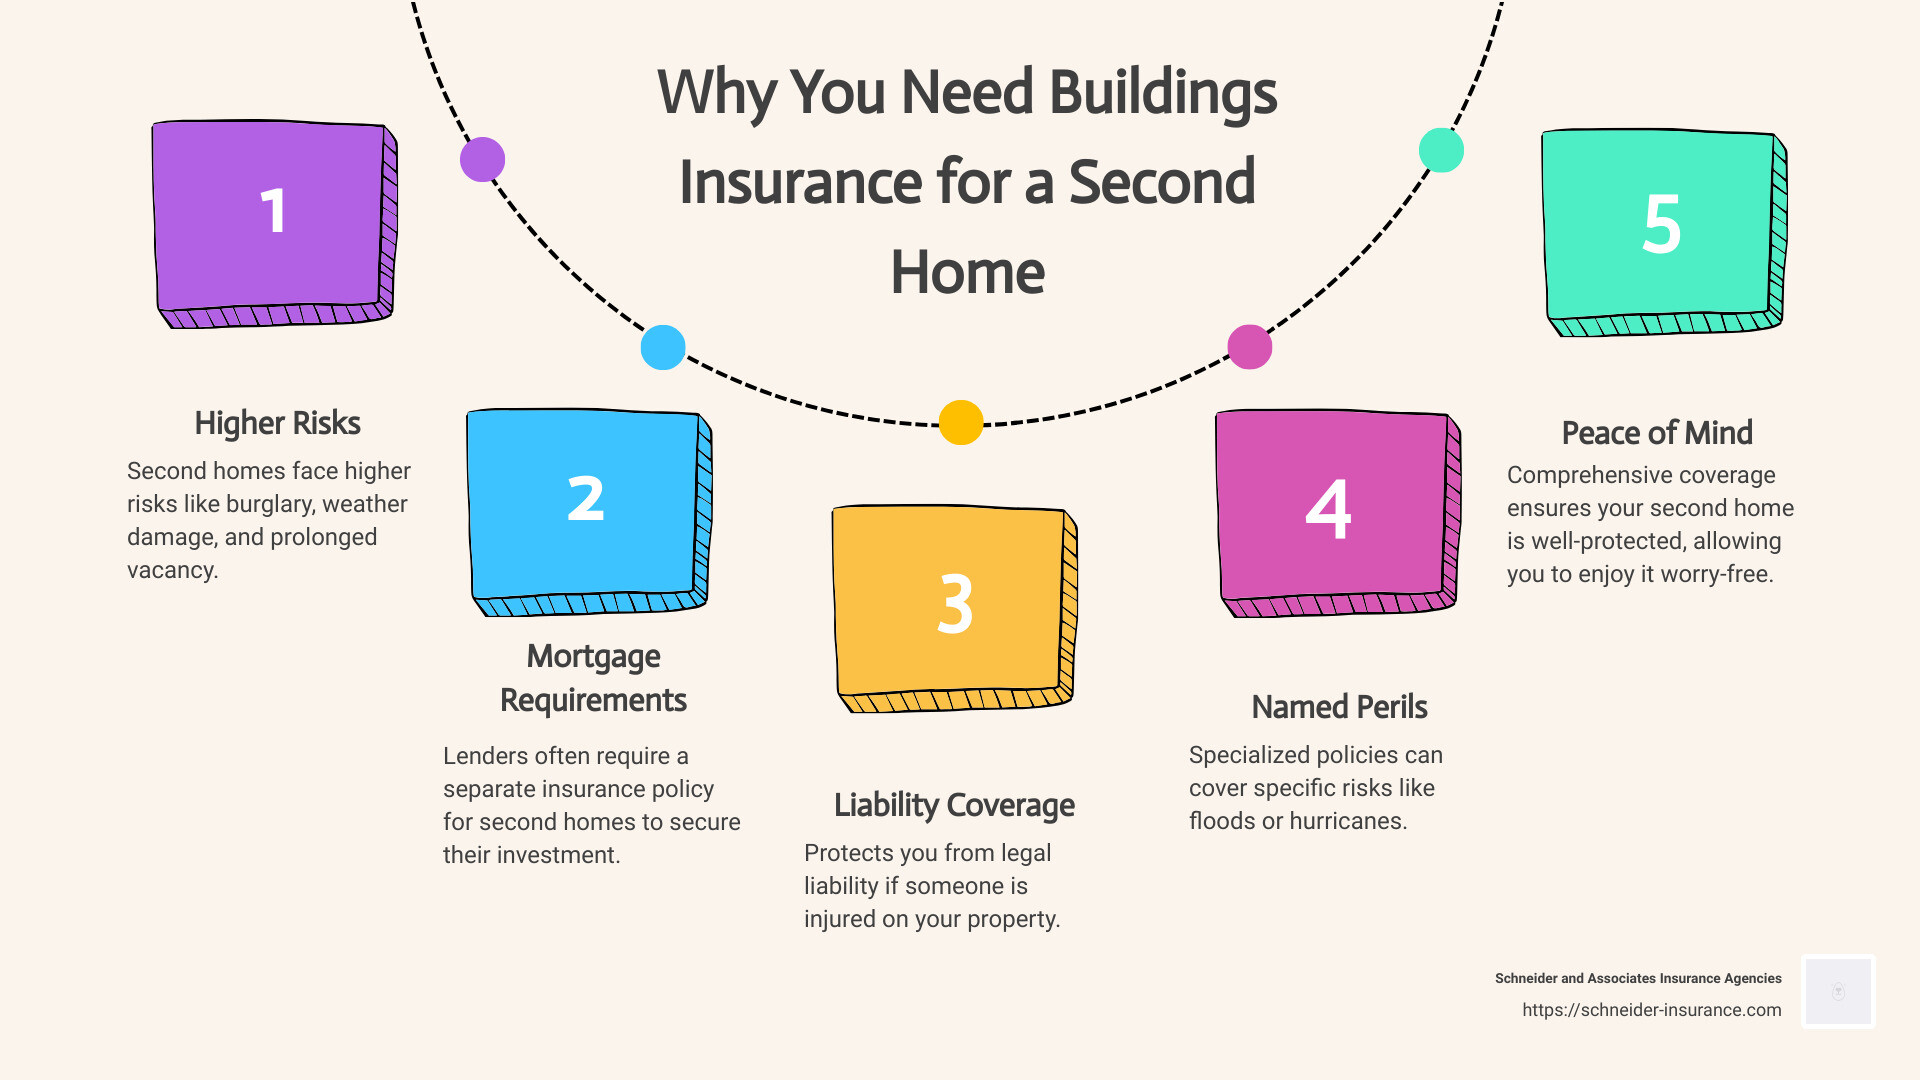 second home insurance details - buildings insurance for second home infographic process-5-steps-informal